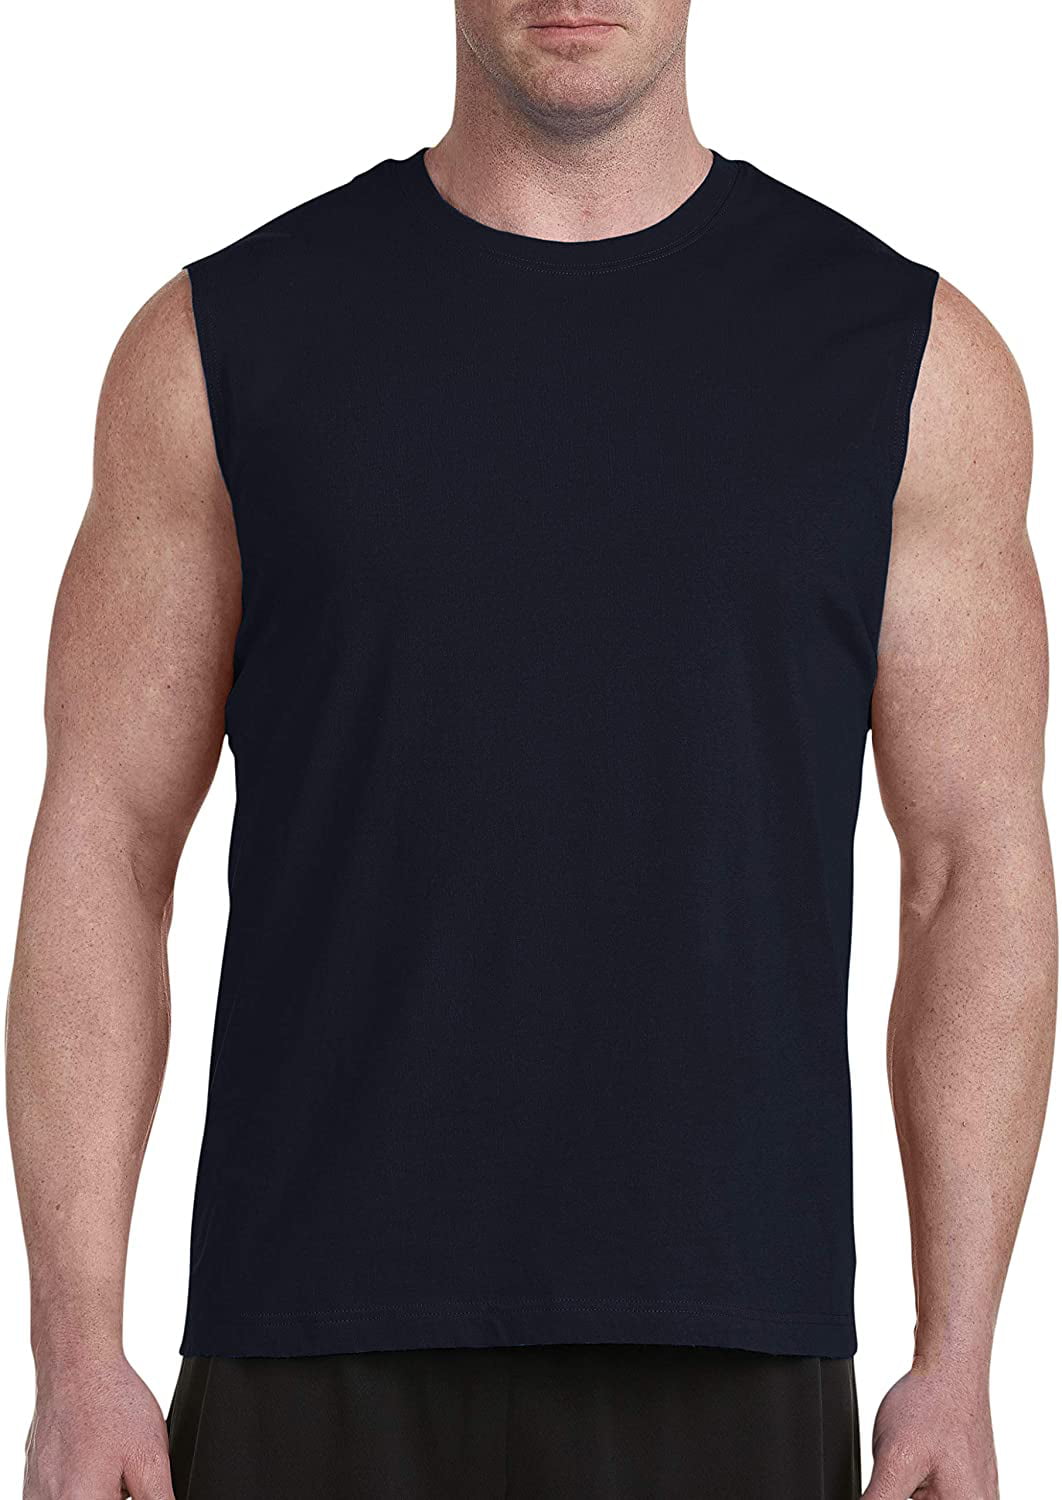 Harbor Bay Moisture-Wicking Muscle T-Shirt - Men's Big and Tall navy 7X ...